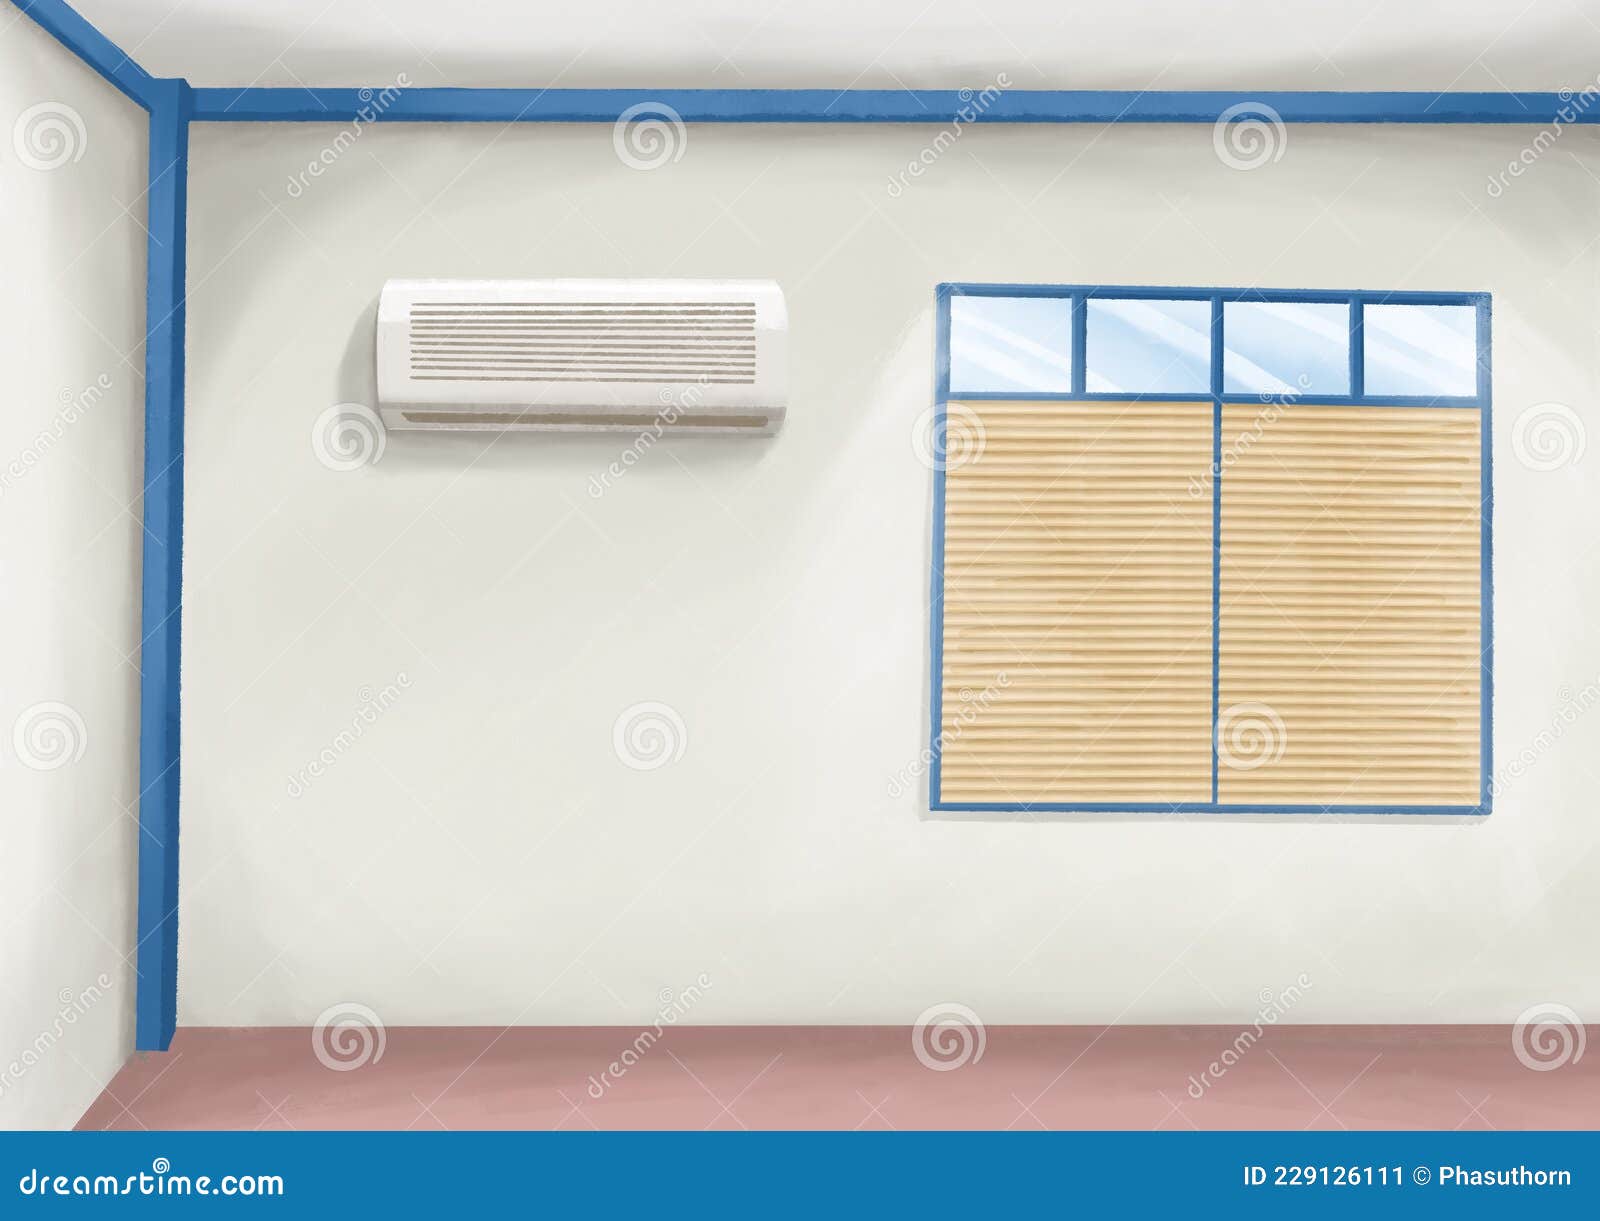 Interior Living Room, Wall of Bedroom with Sun Blinds and Air Condition  Stock Illustration - Illustration of indoors, blue: 229126111